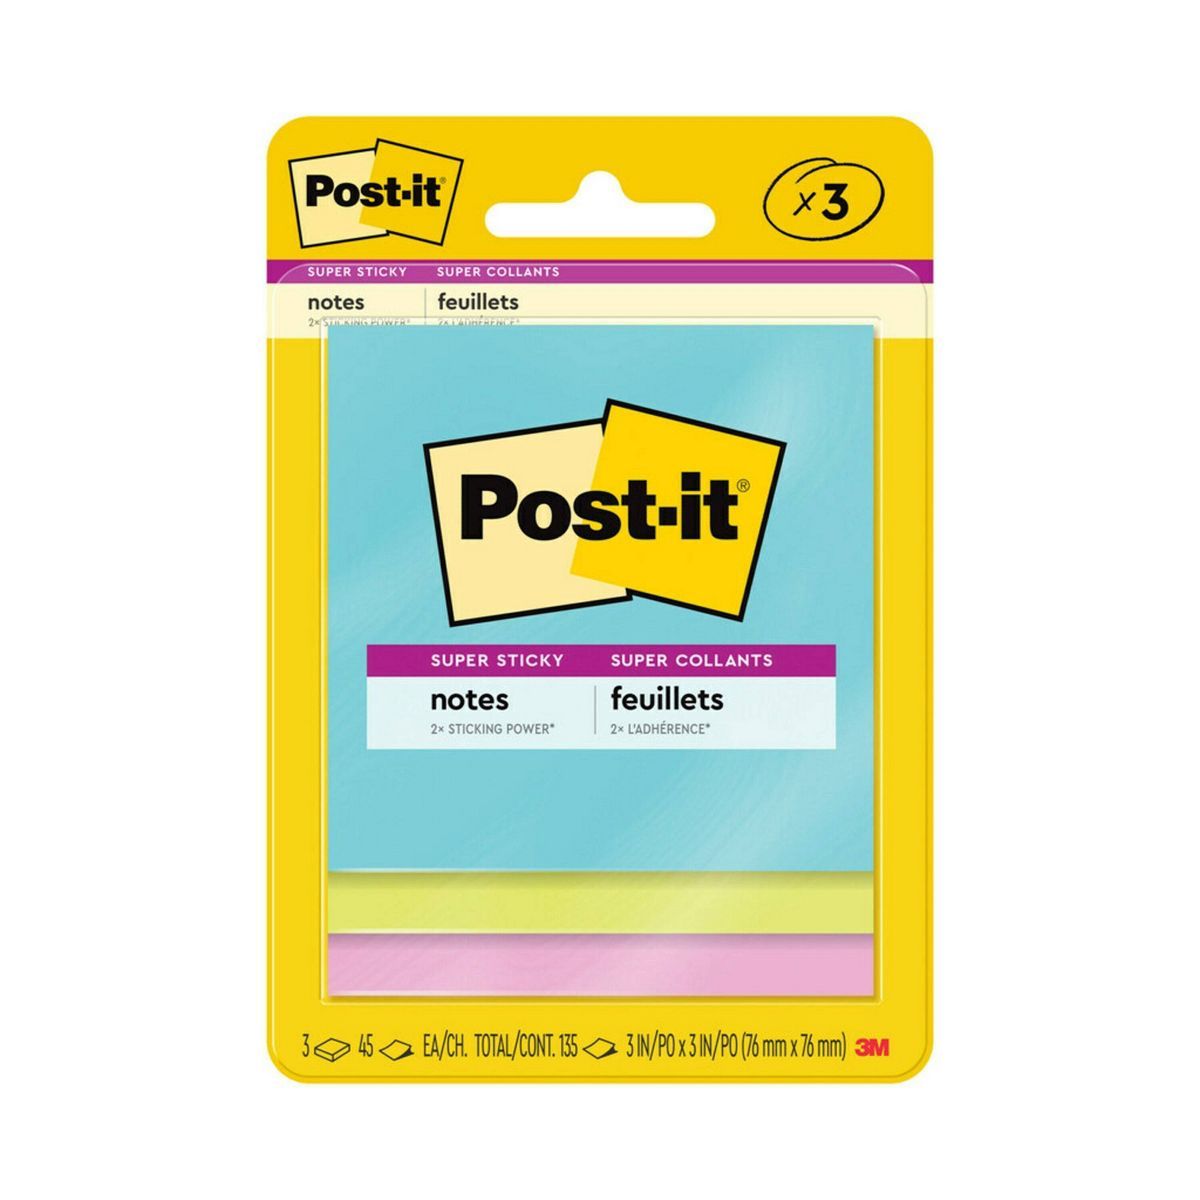 Post-it 3pk 3" x 3" Super Sticky Notes 45 Sheets/Pad - Miami Collection | Target